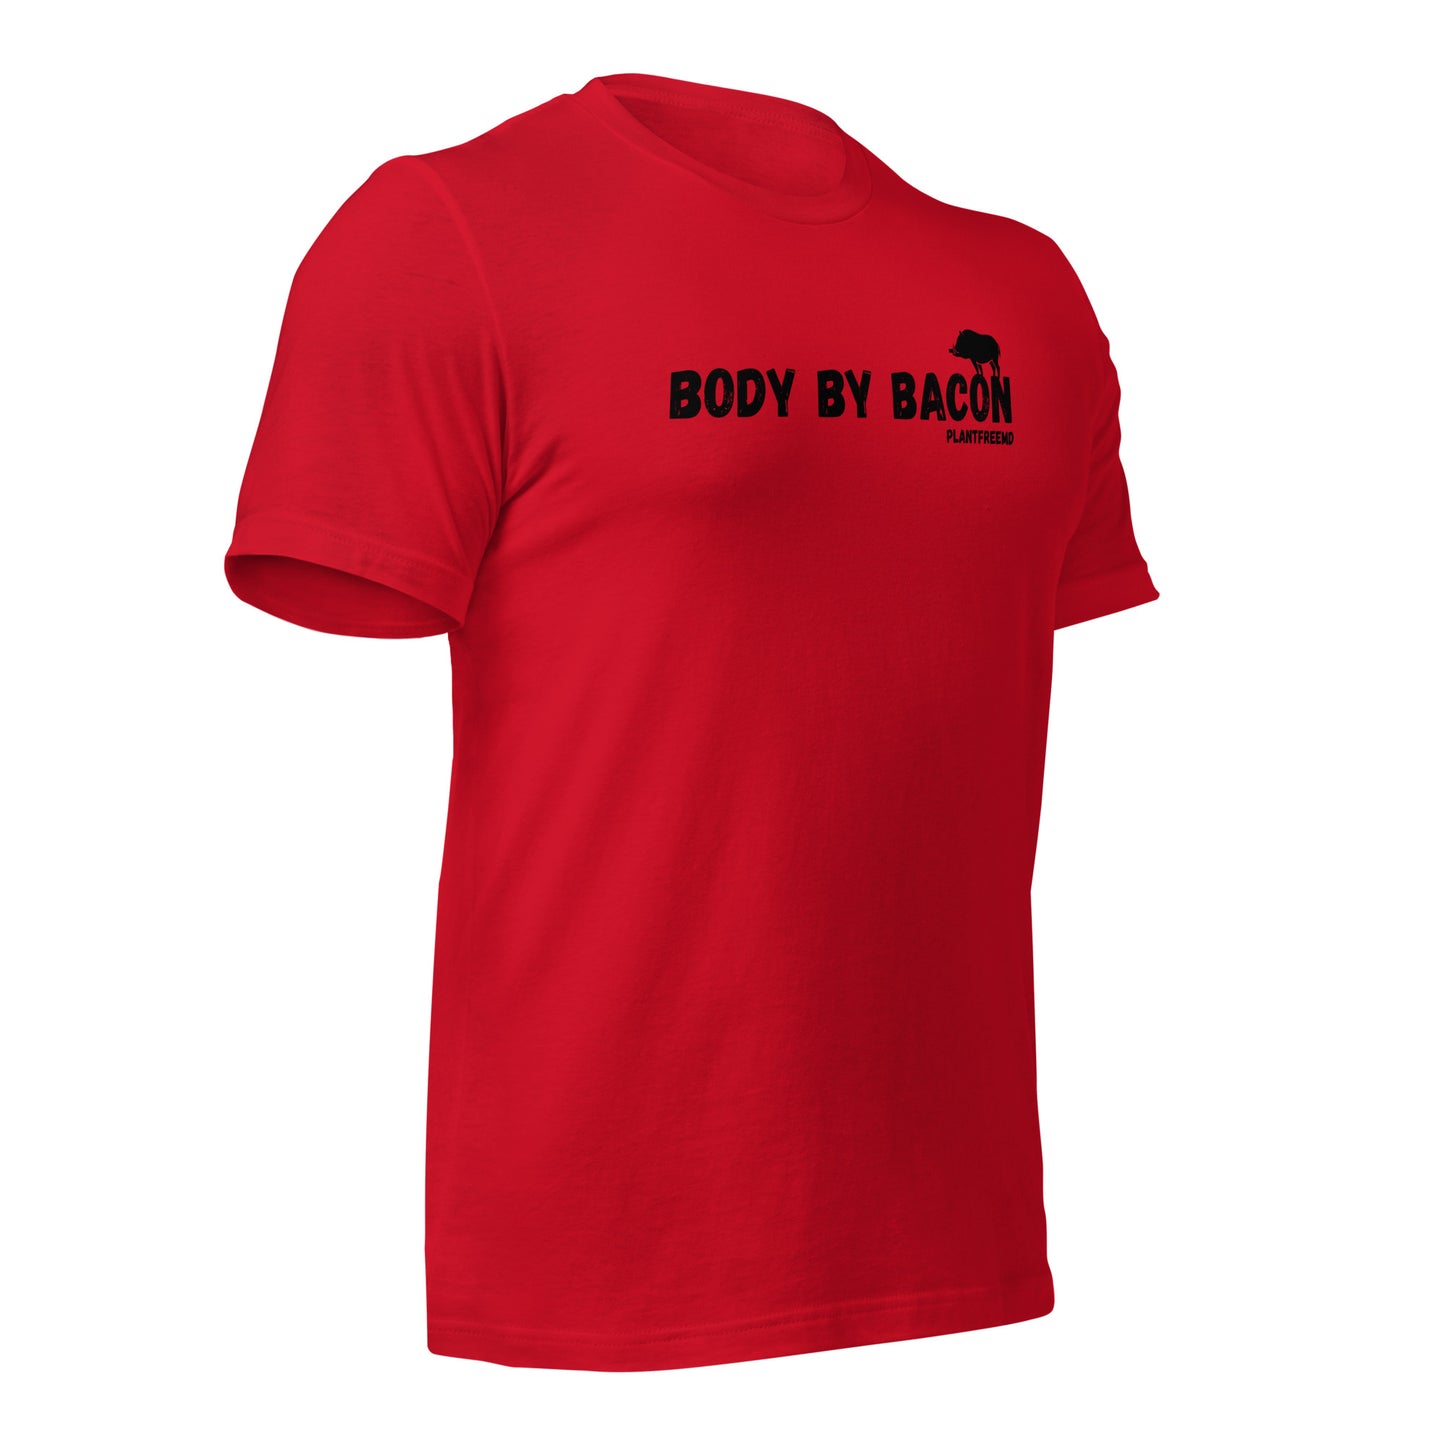 Body By Bacon Unisex T-shirt